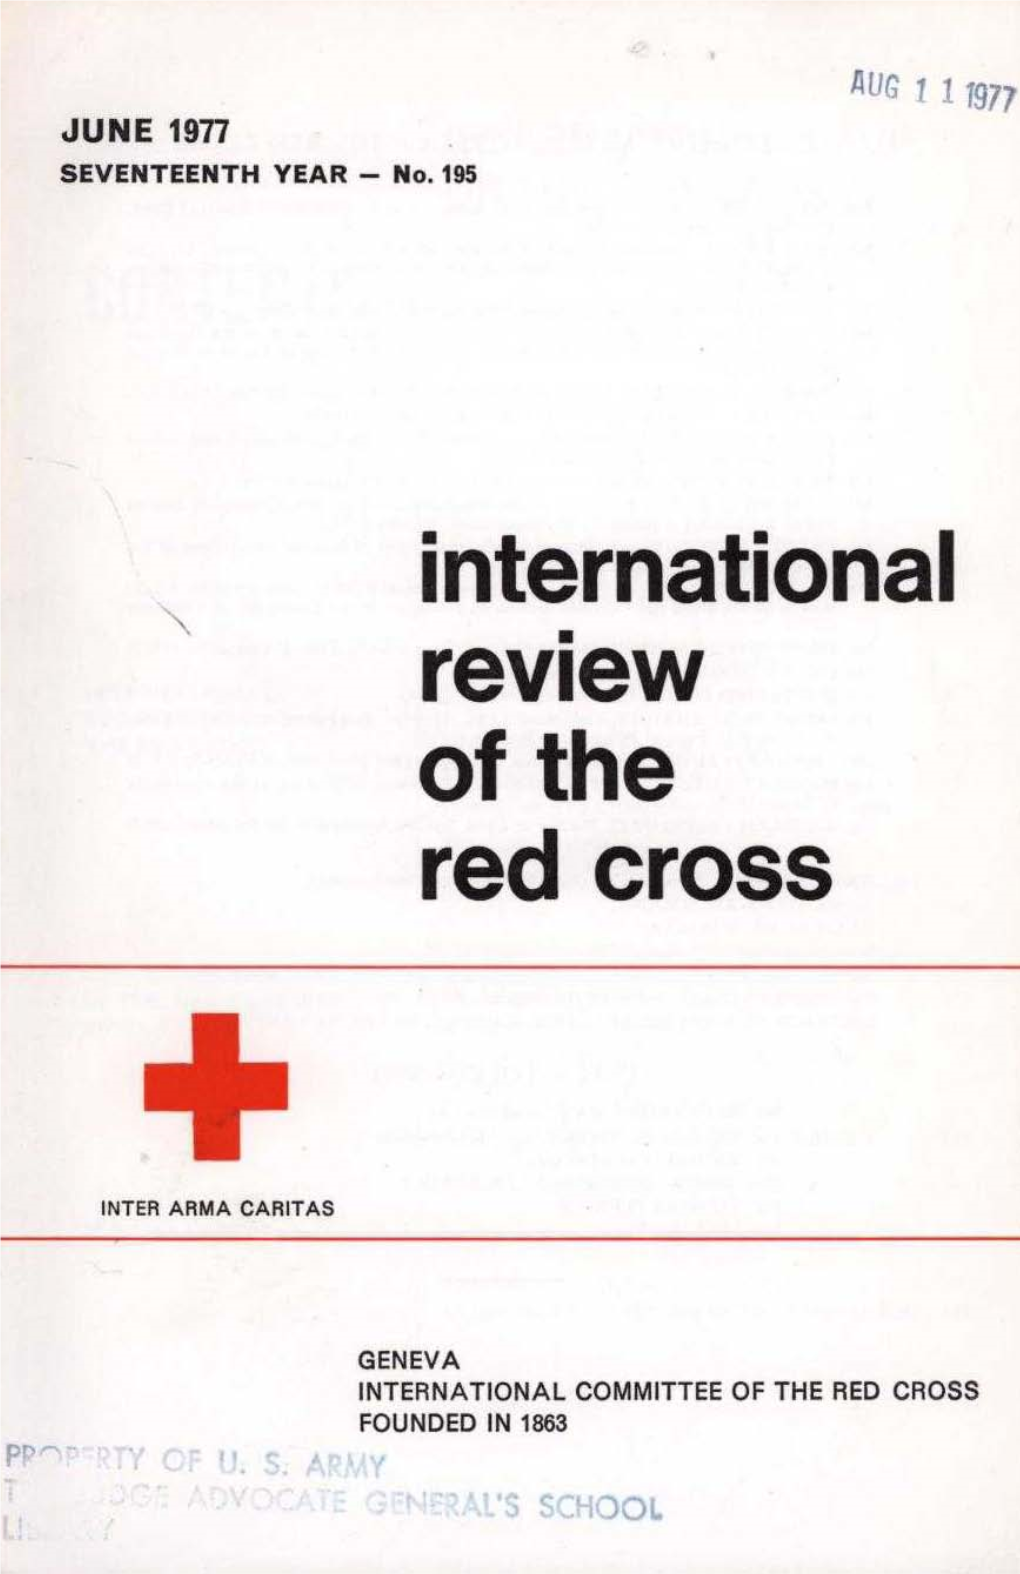 International Review of the Red Cross, June 1977, Seventeenth Year